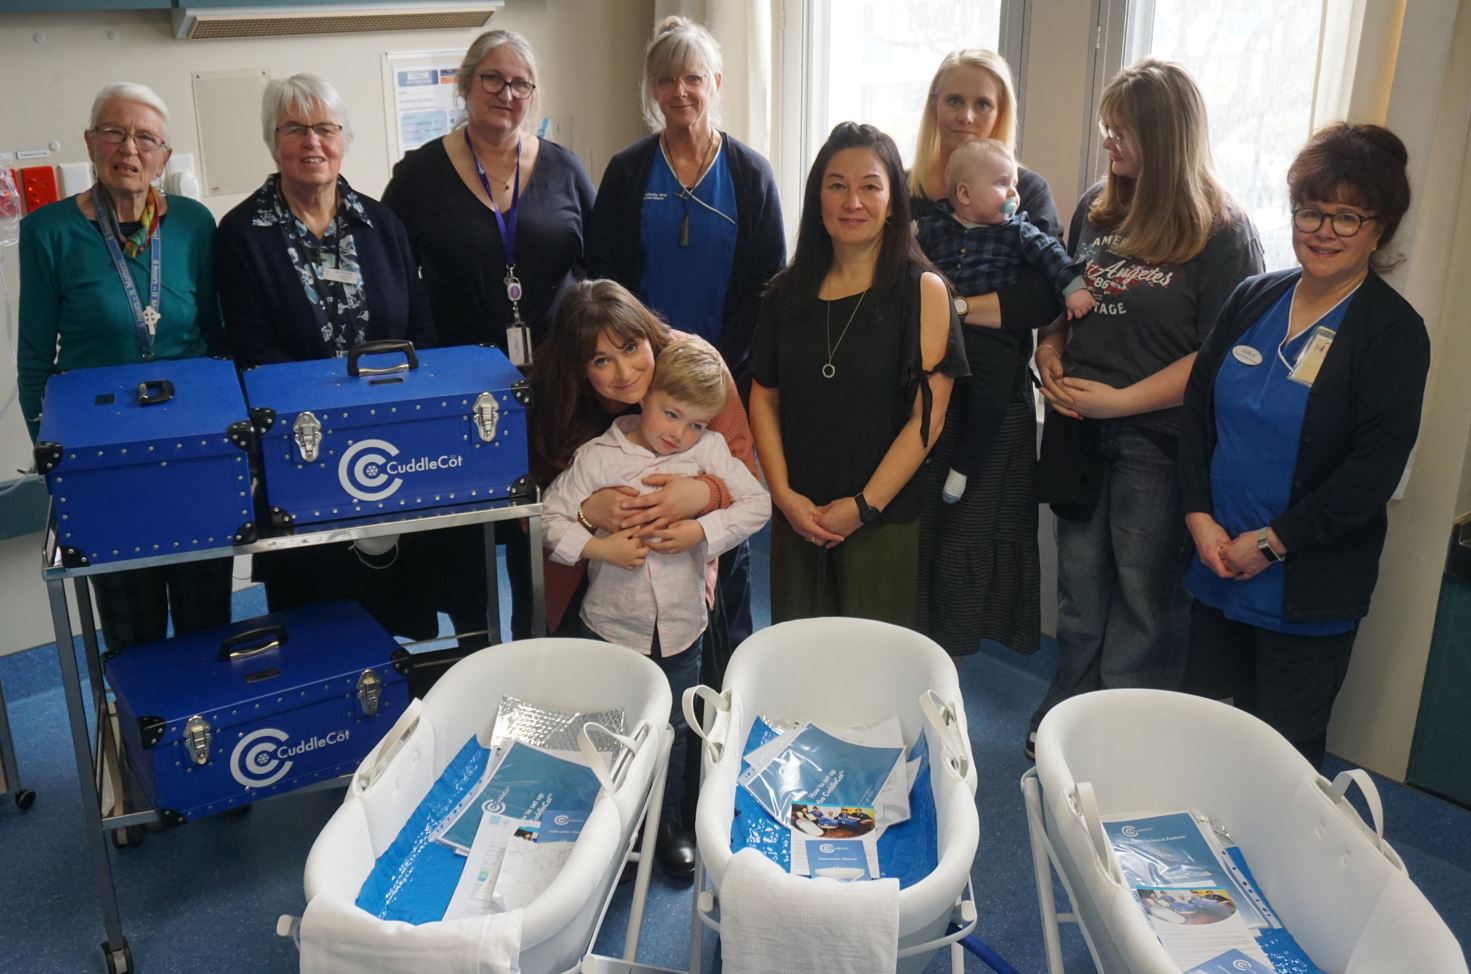 New Cuddle Cots to Support Grieving Parents and Whānau Blessed in Dunedin